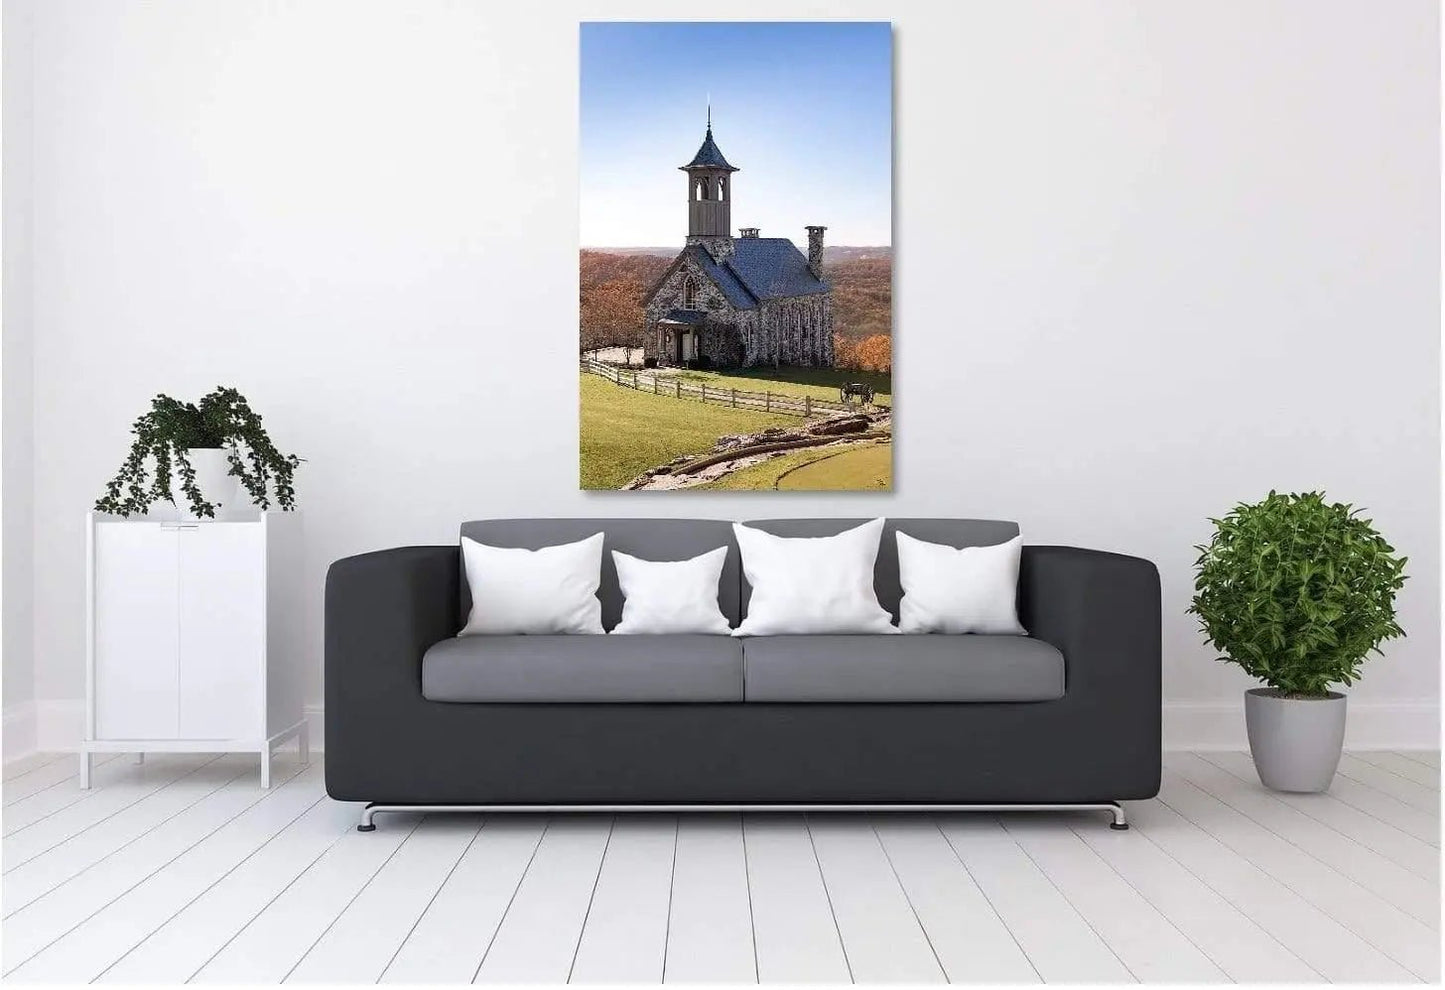 40x60 Bountiful Blessings Chapel art hanging over couch